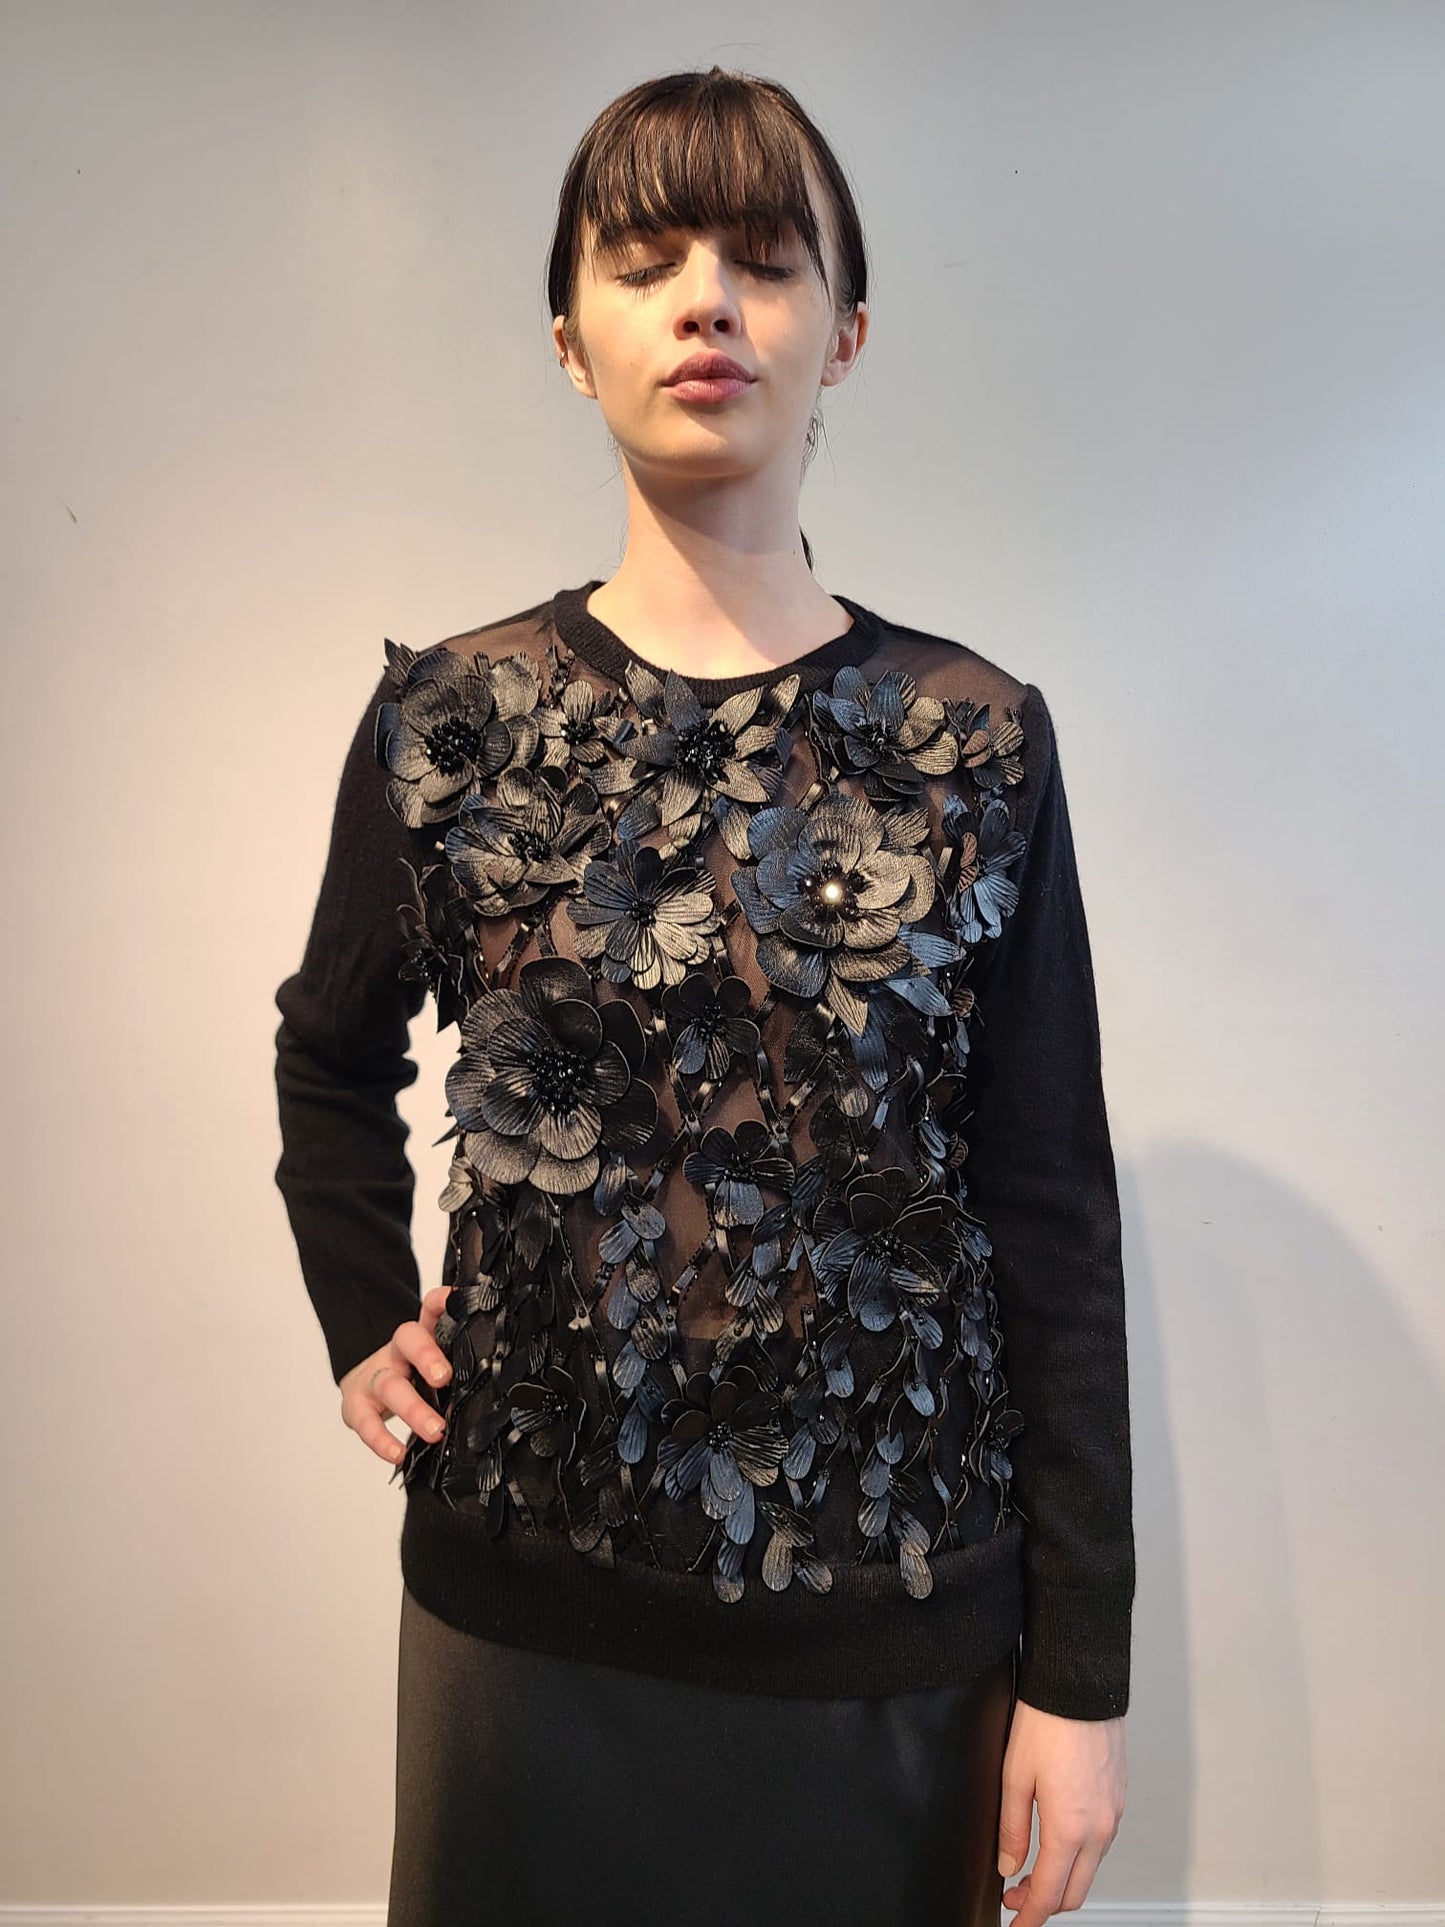 BLACK CASHMERE CREW NECK LONG SLEEVE WITH FRONT BLACK 3D VEGAN LEATHER FLOWERS WITH JET BEAD STERNUM ON BLACK SATIN PERGOLA ON BLACK TULLE (SIZE M)